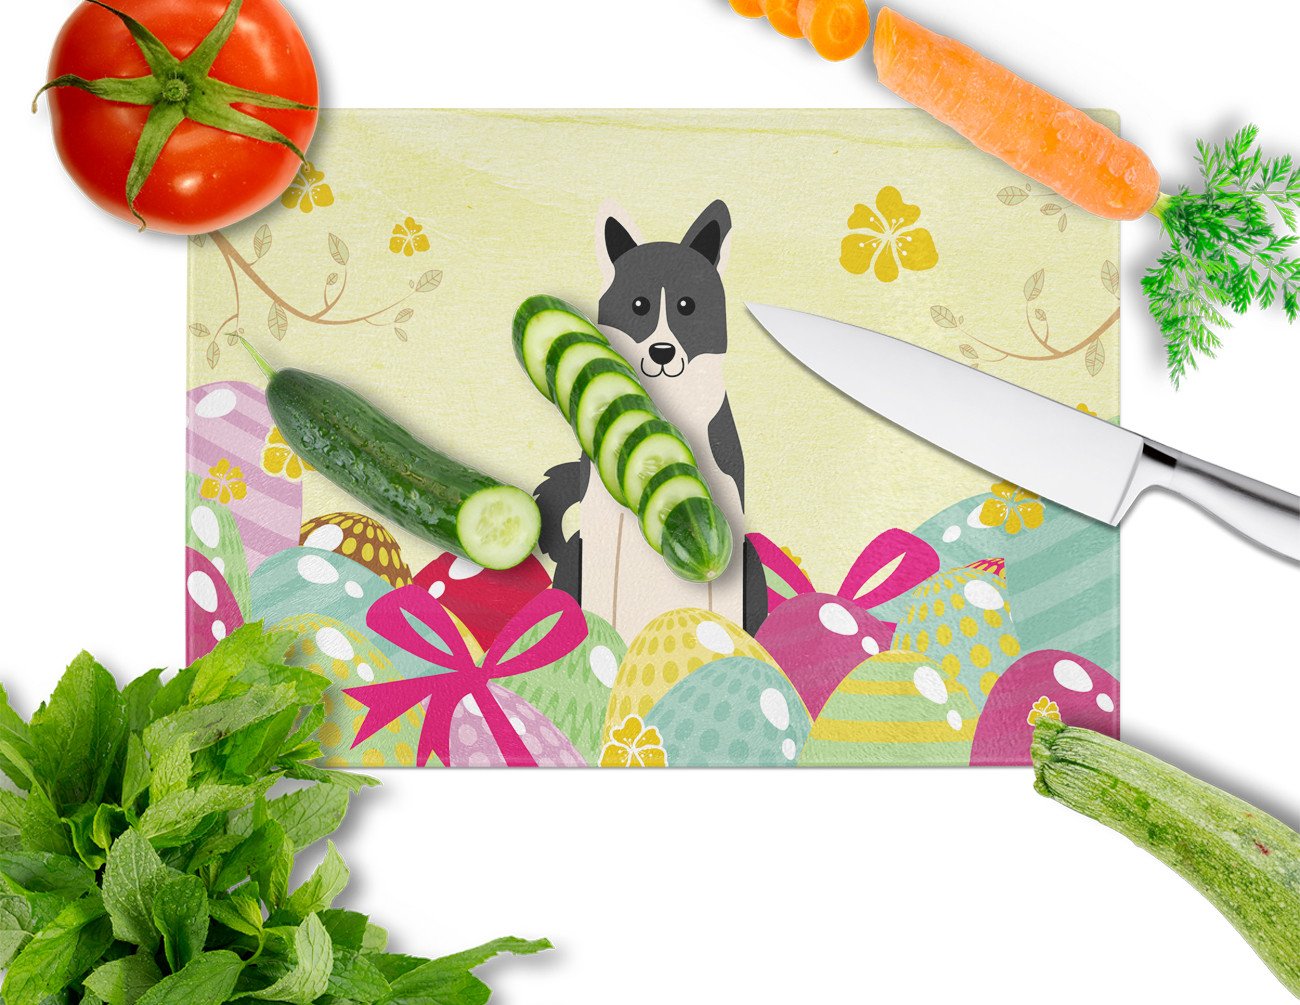 Easter Eggs Russo-European Laika Spitz Glass Cutting Board Large BB6029LCB by Caroline's Treasures